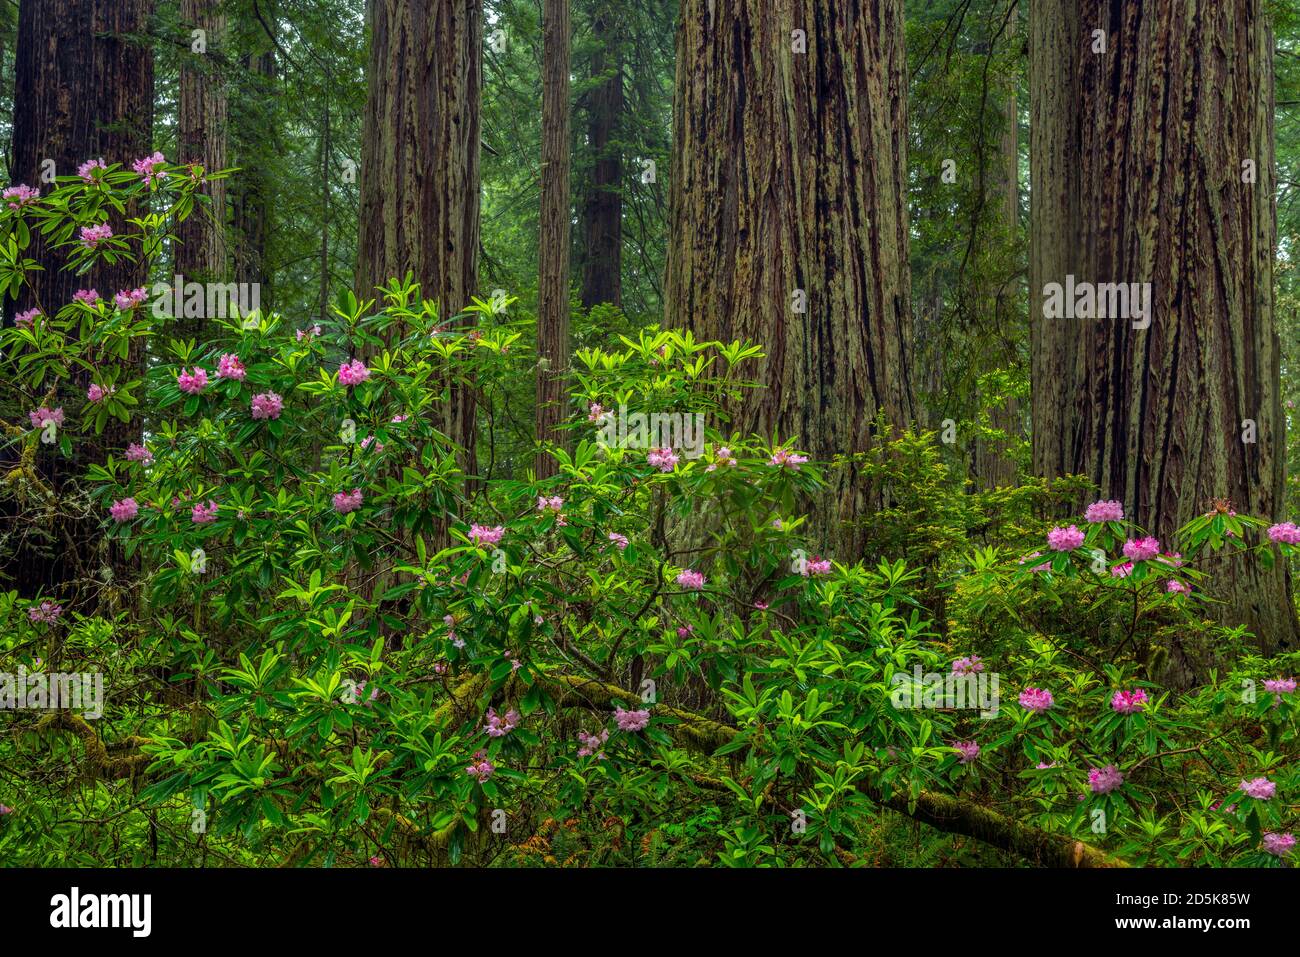 Rhododendron, Damnation Creek, Del Norte Redwoods State Park, Redwood National and State Parks, California Stock Photo